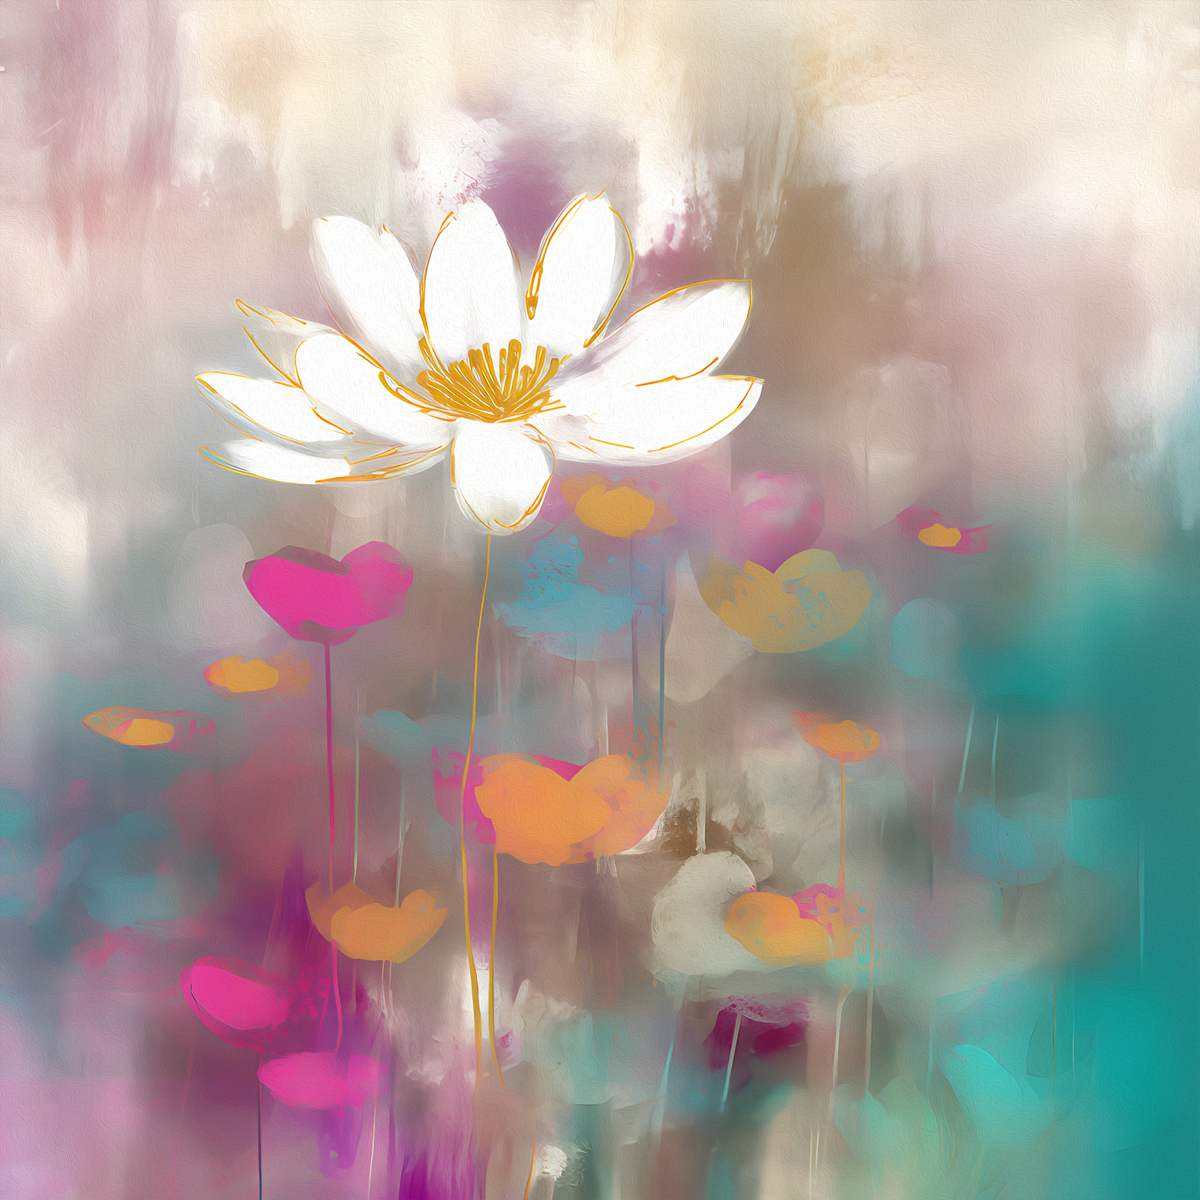  Solitary Elegance: 'White Daisy' Art Collection - Art Print on Canvas. Artemyst